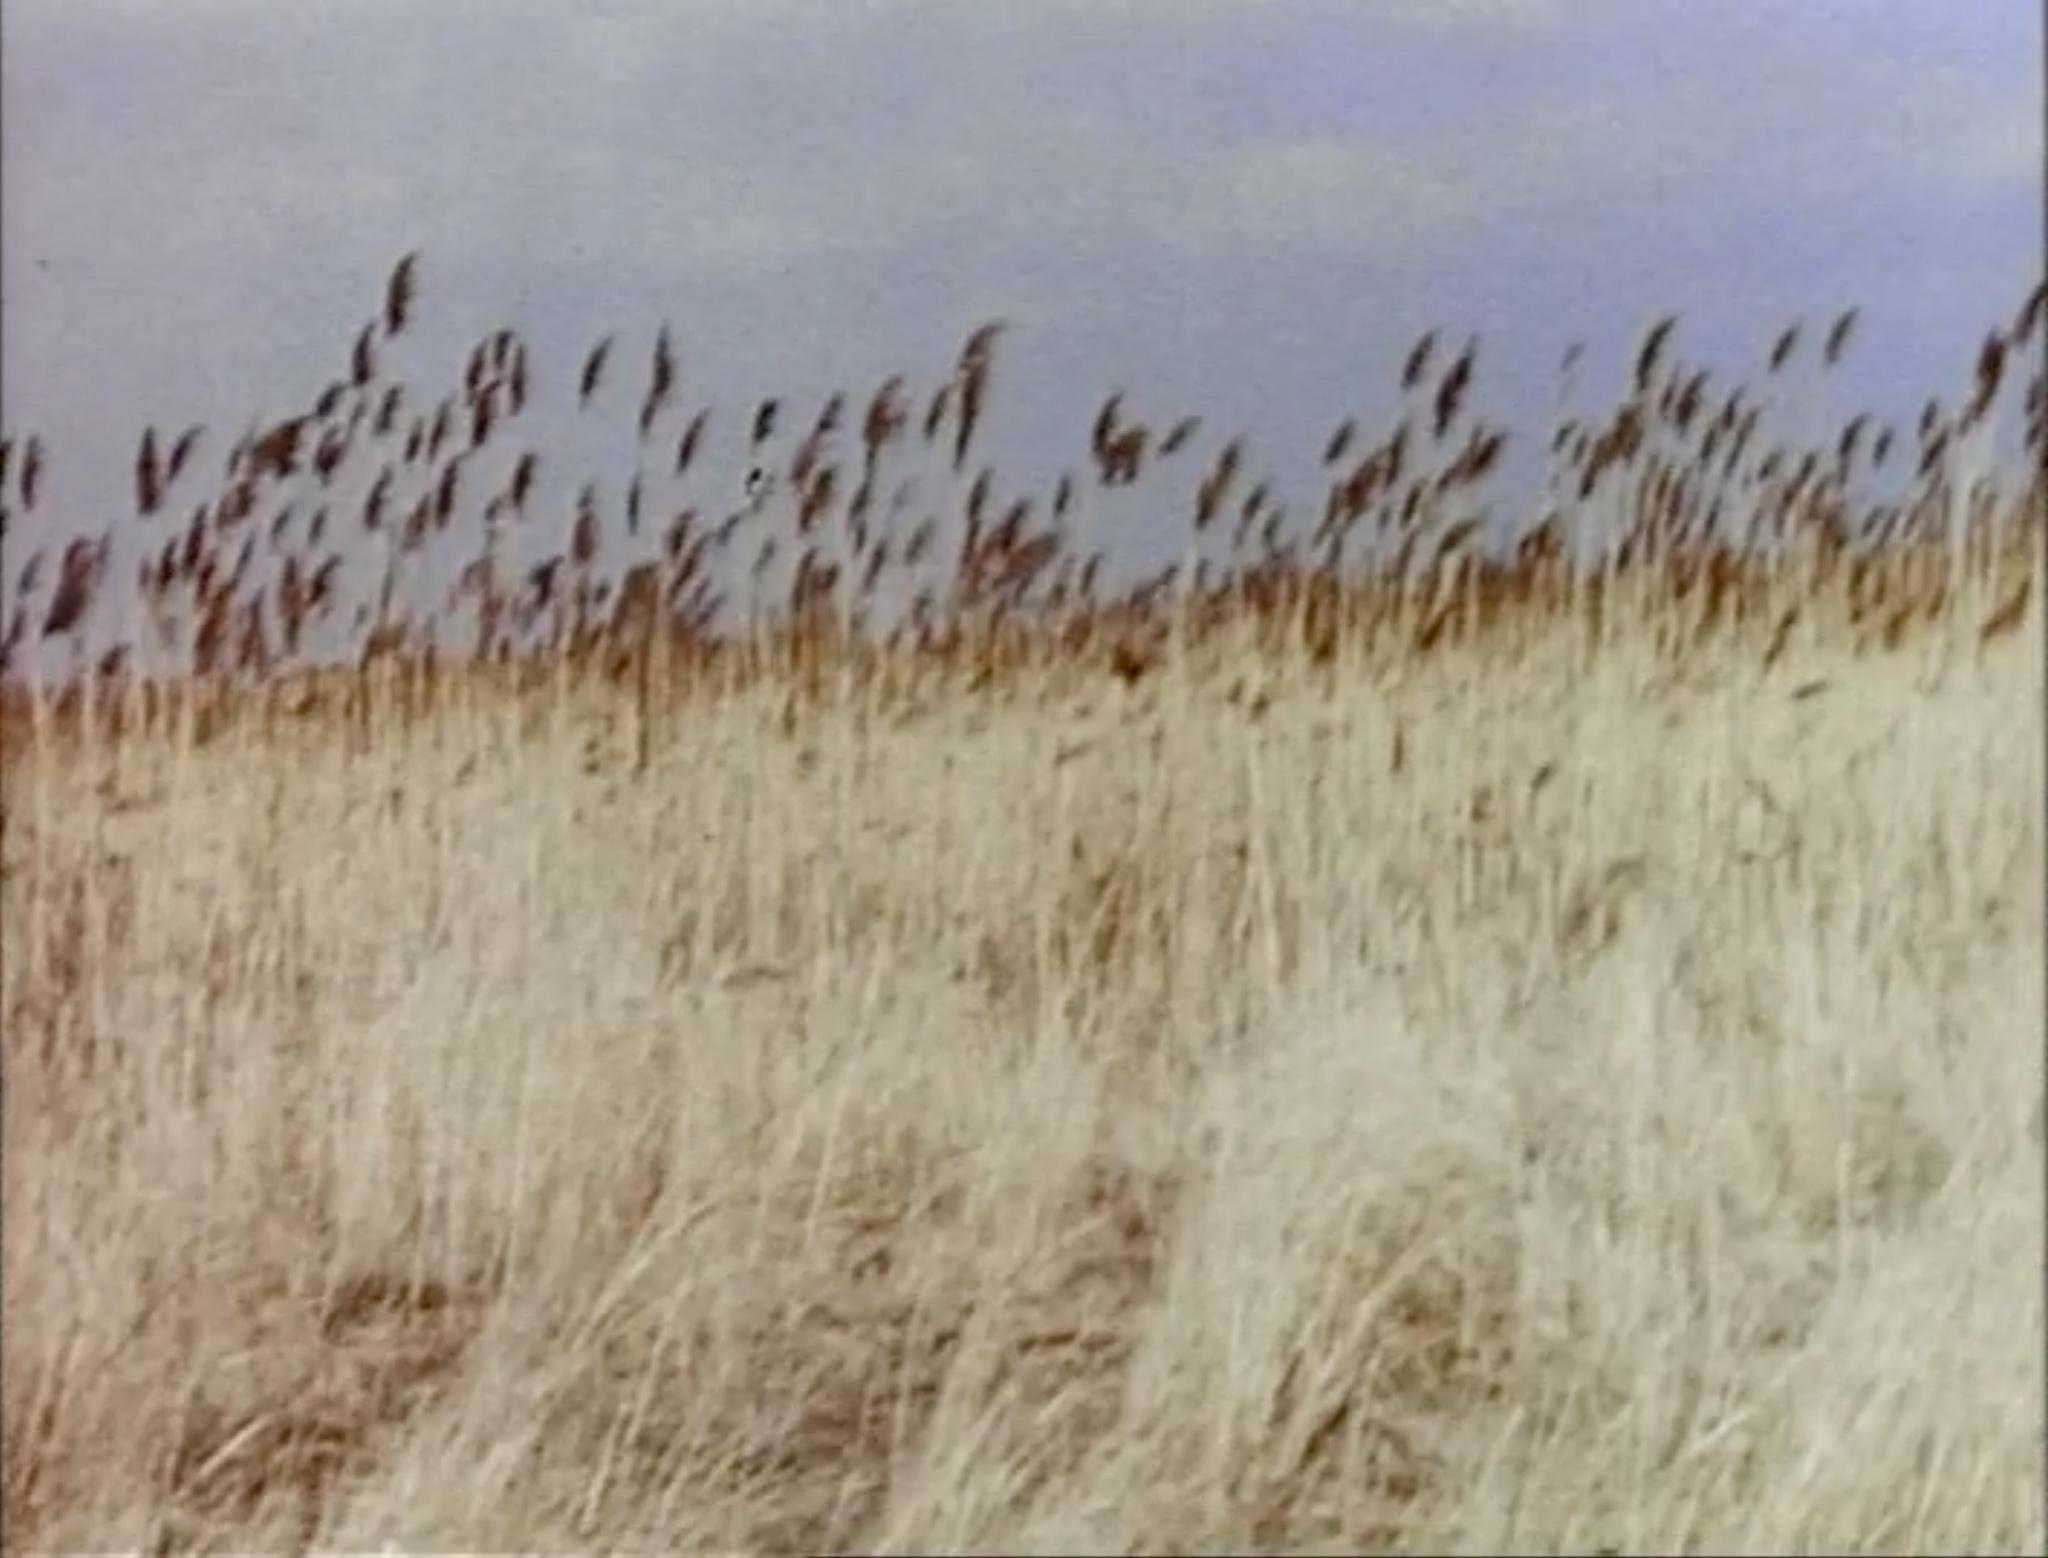 image of many criss-crossing reeds with sky in the background